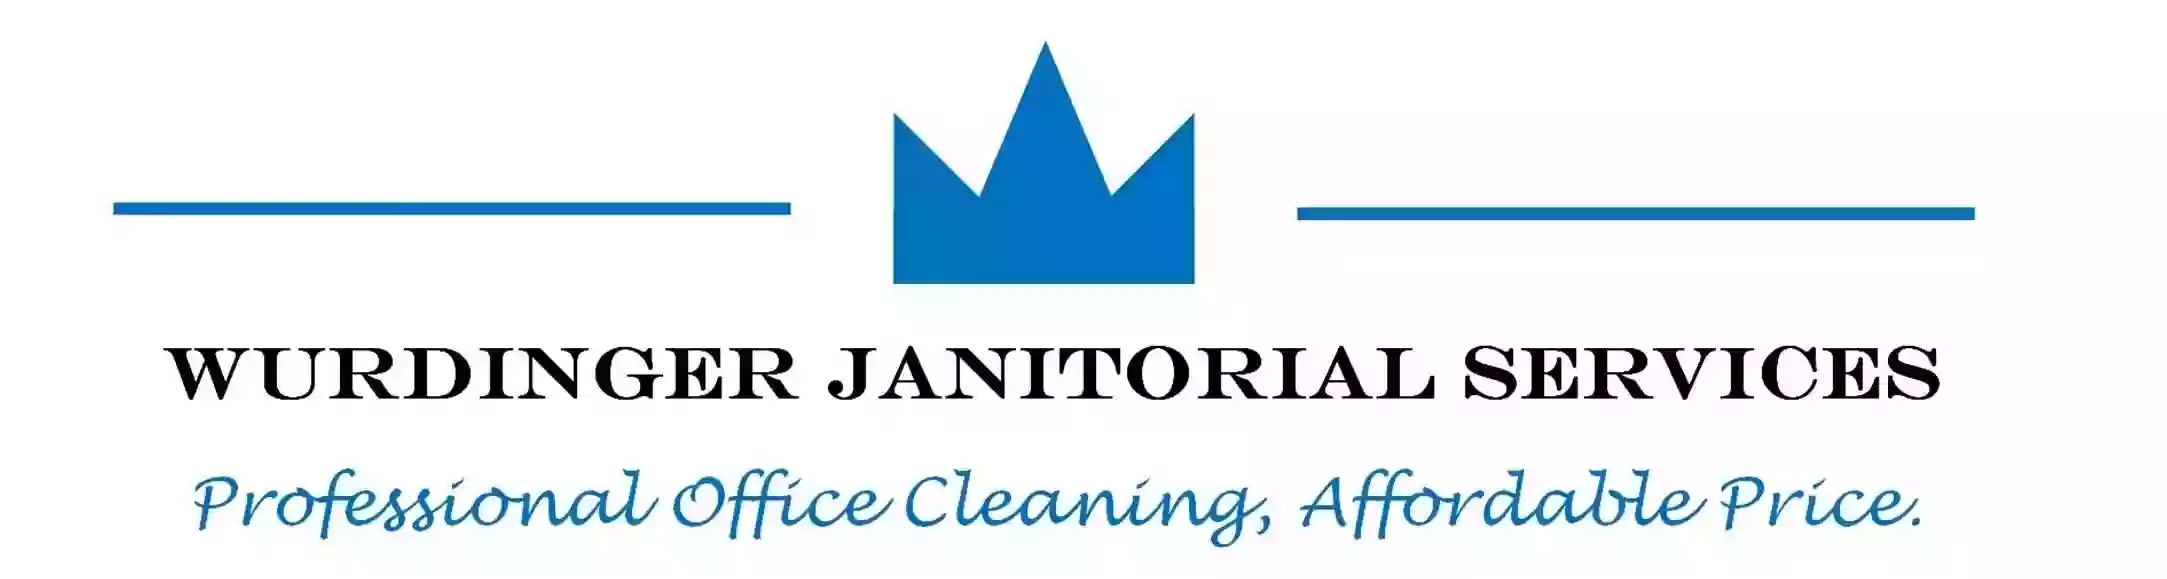 Wurdinger Janitorial Services